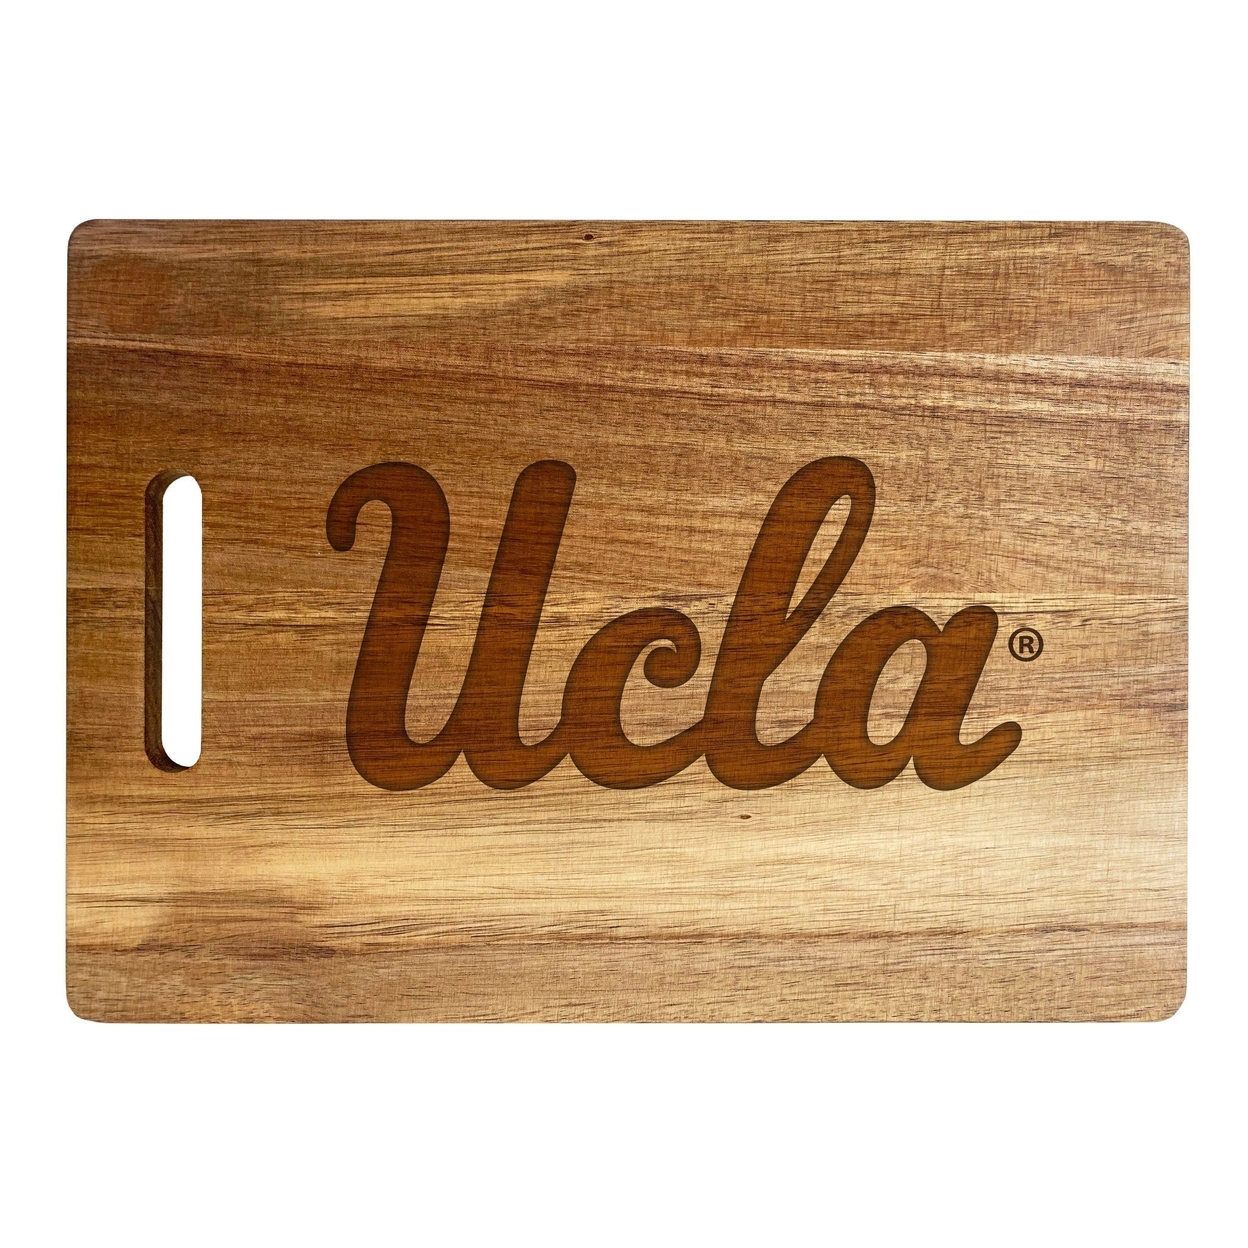 UCLA Bruins Engraved Wooden Cutting Board 10 X 14 Acacia Wood - Large Engraving